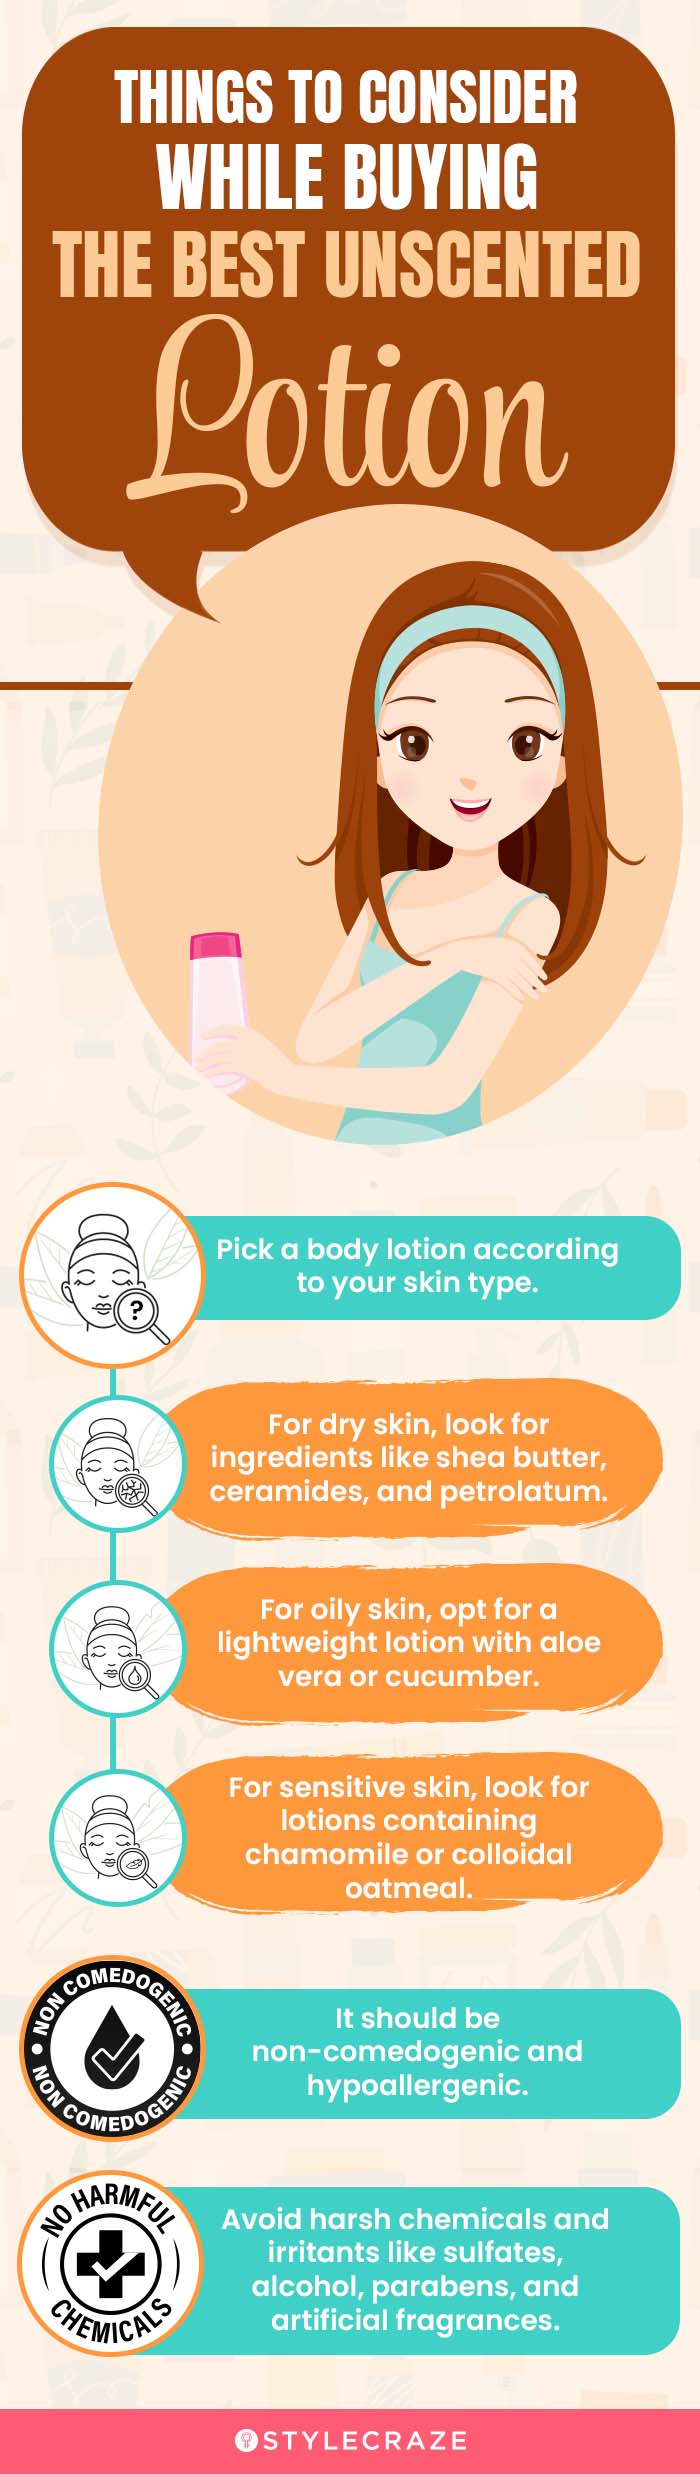 Things to consider while buying the best unscented lotion (infographic)